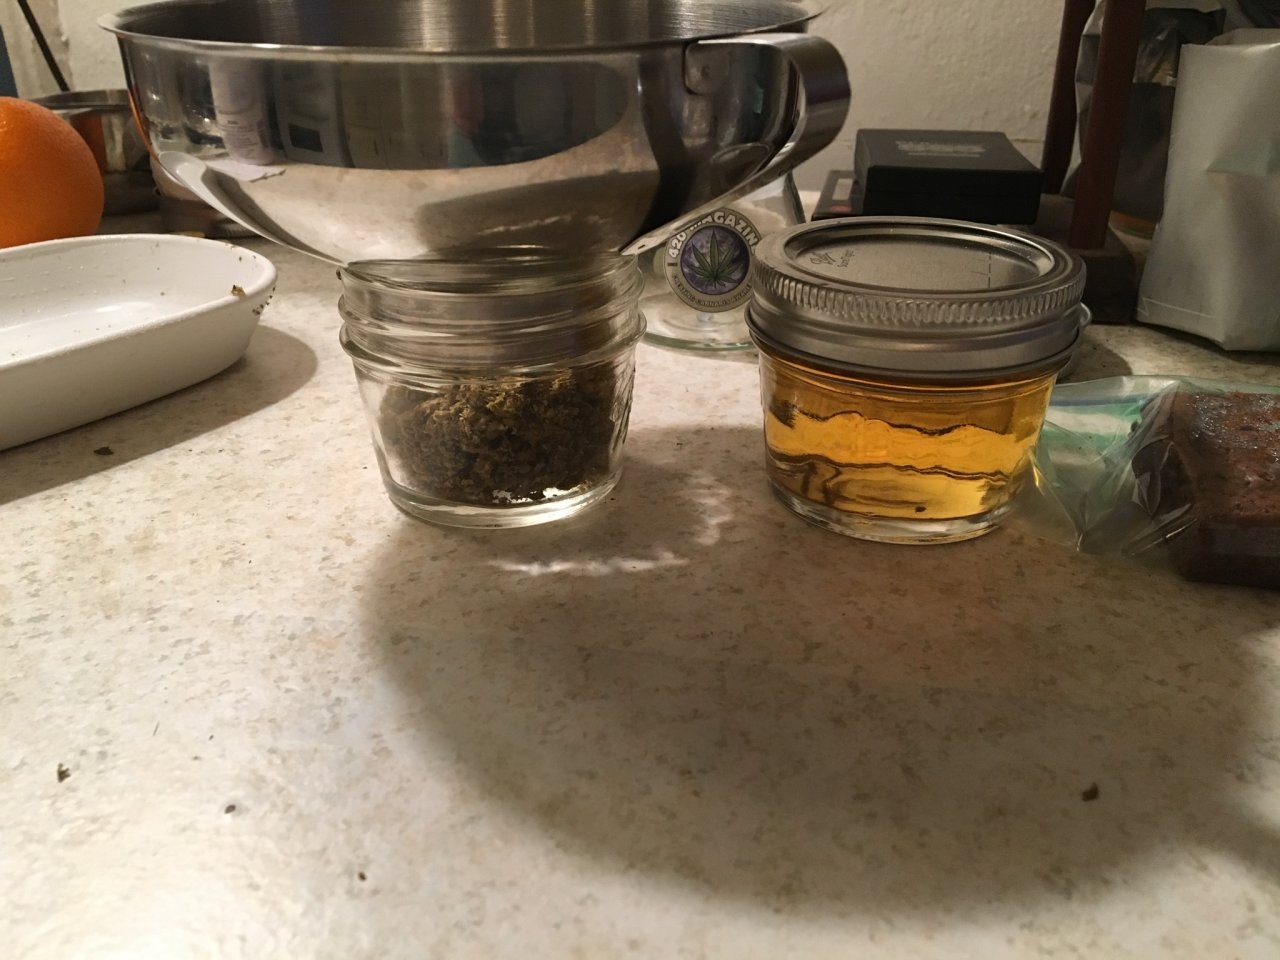 You’ll have a jar of bud and a jar with slightly more alcohol.